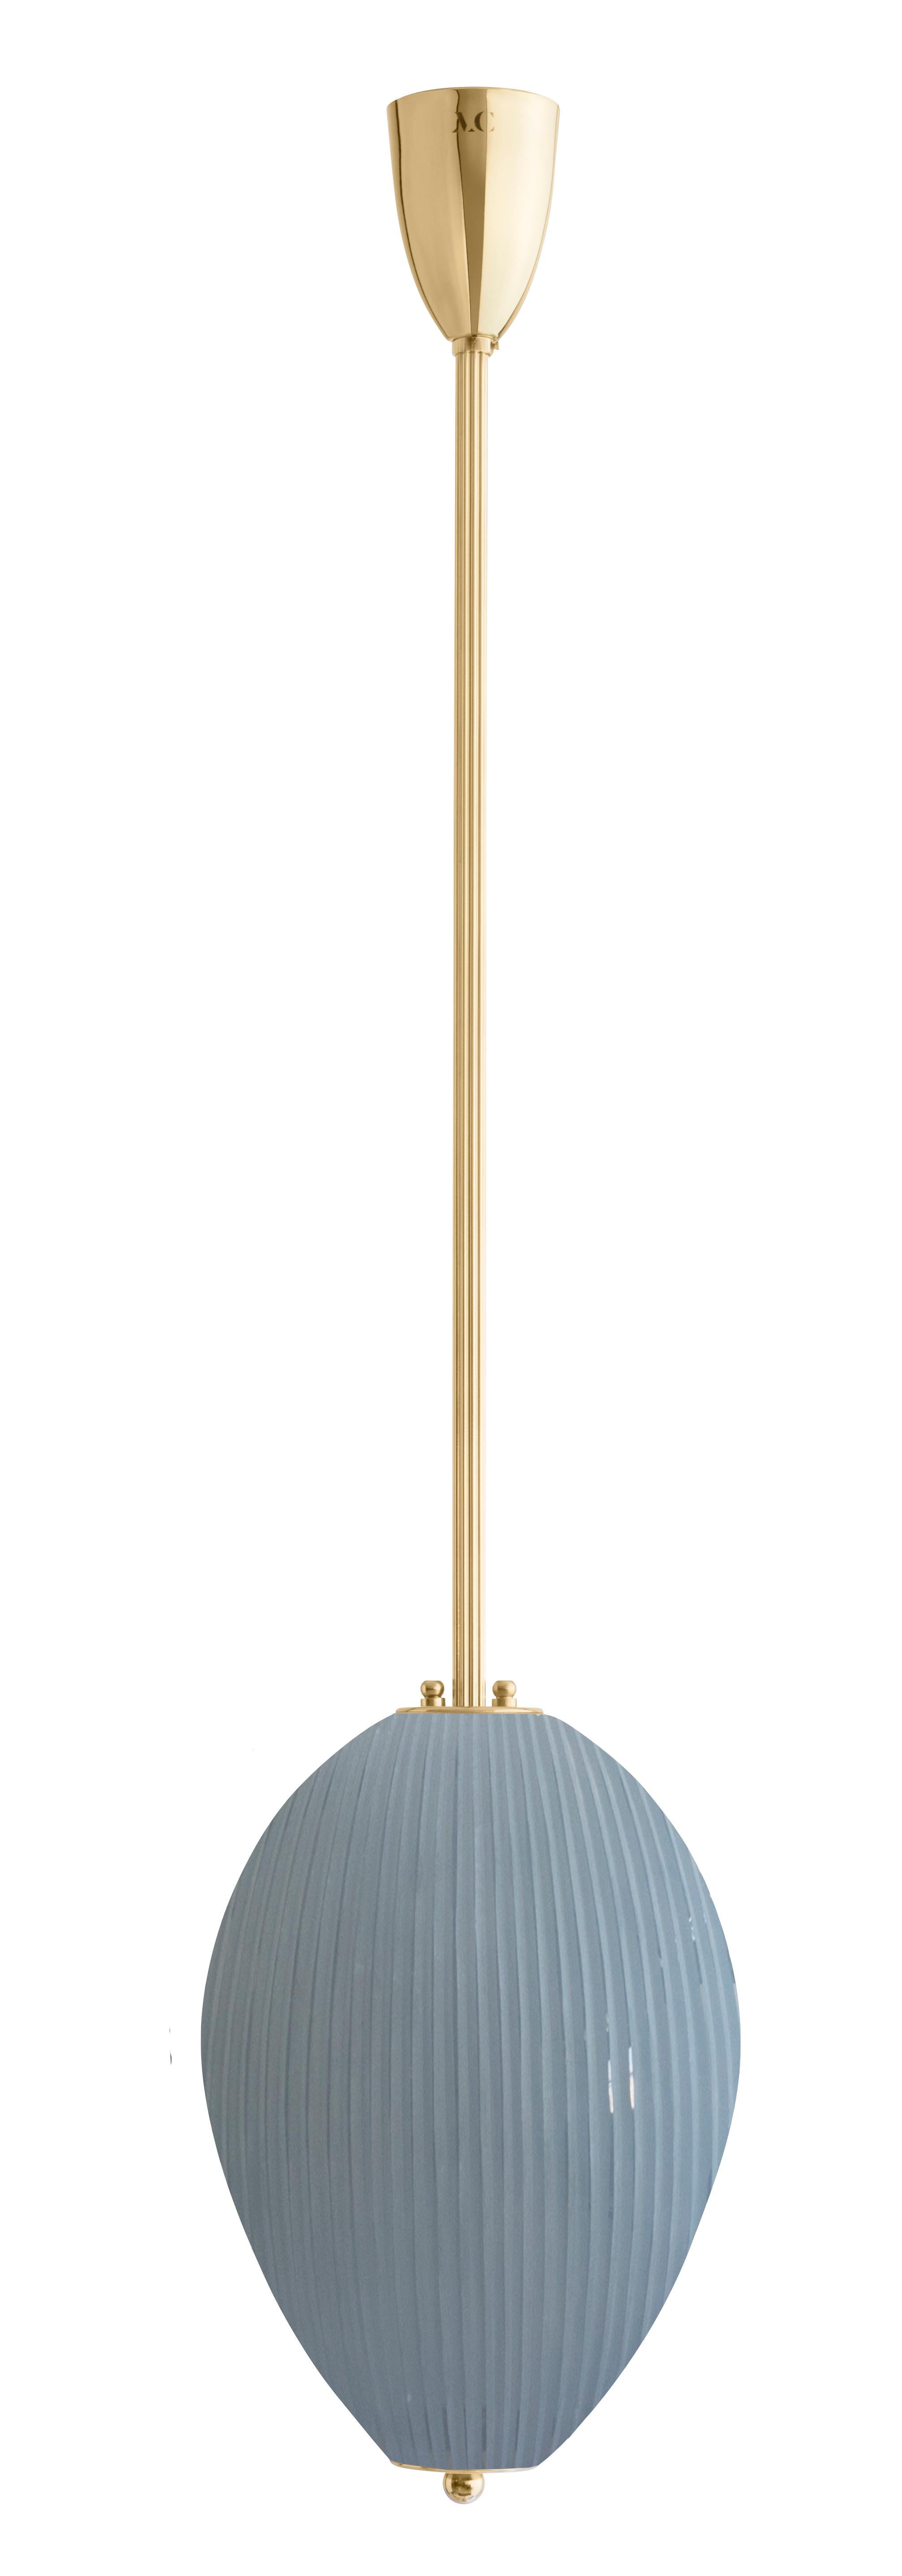 Pendant China 10 by Magic Circus Editions.
Dimensions: H 90 x W 32 x D 32 cm, also available in H 110, 130, 150, 175, 190 cm.
Materials: brass, mouth blown glass sculpted with a diamond saw.
Colour: opal grey.

Available finishes: brass,